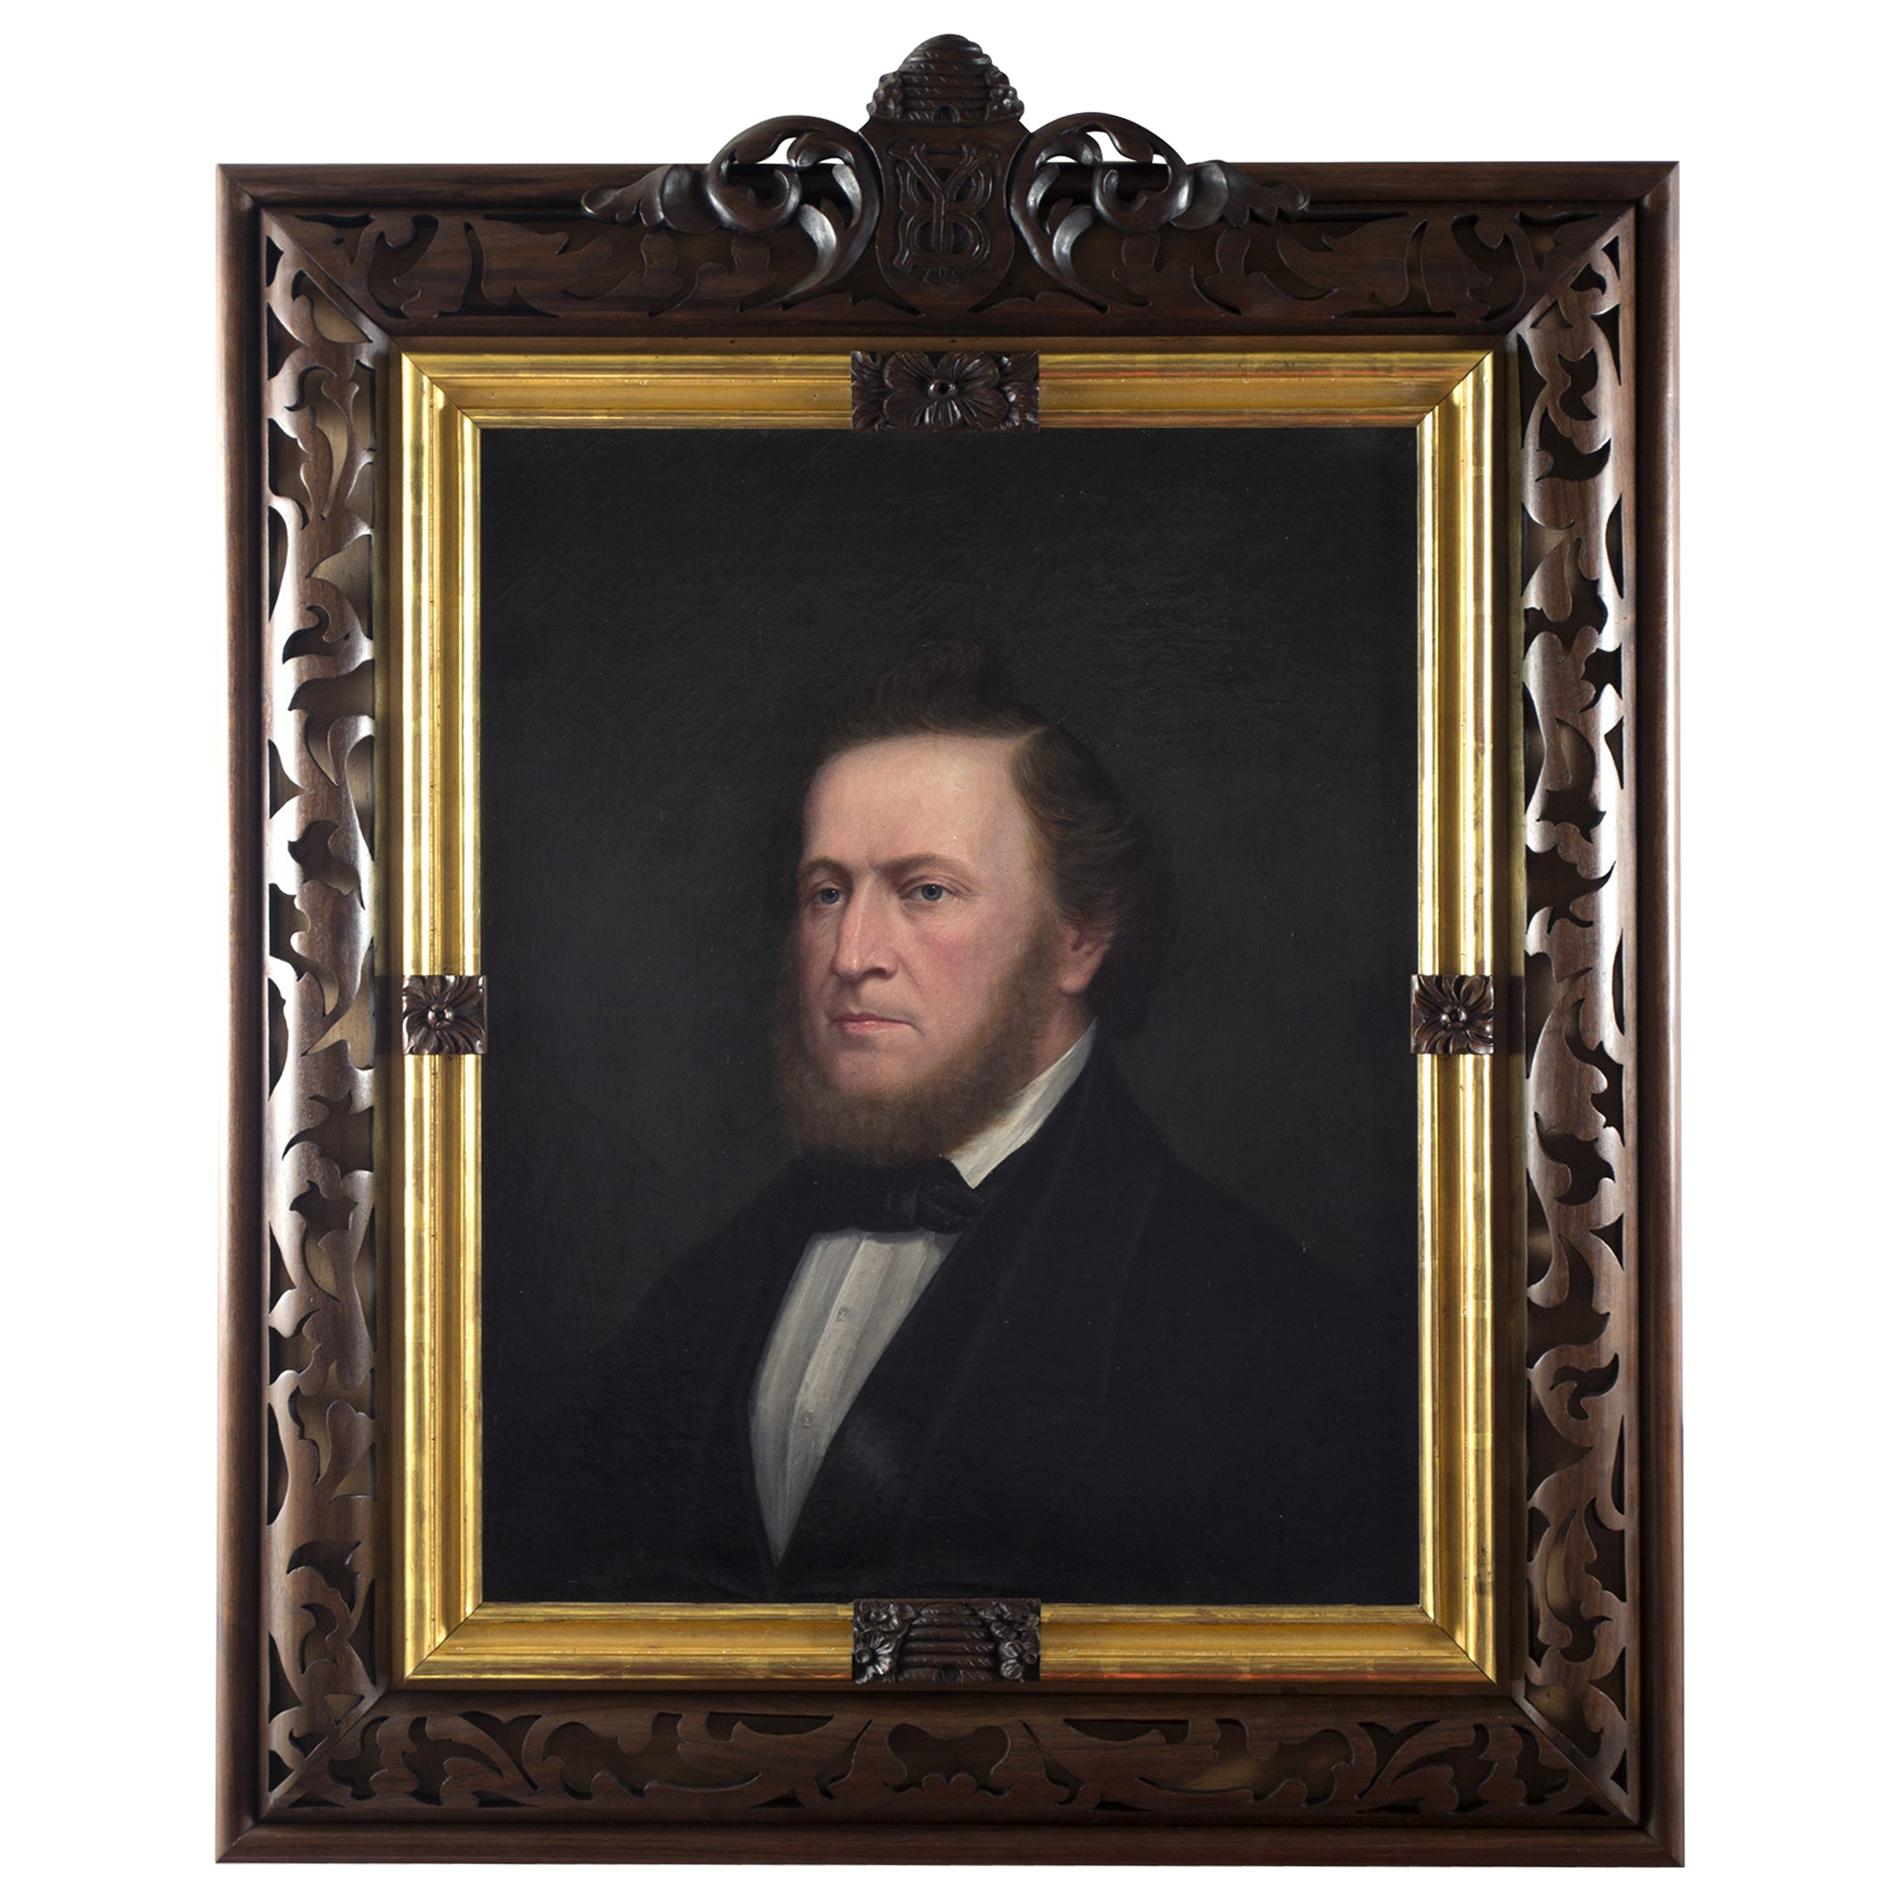 Brigham Young '1865' by Enoch Wood Perry Jr.